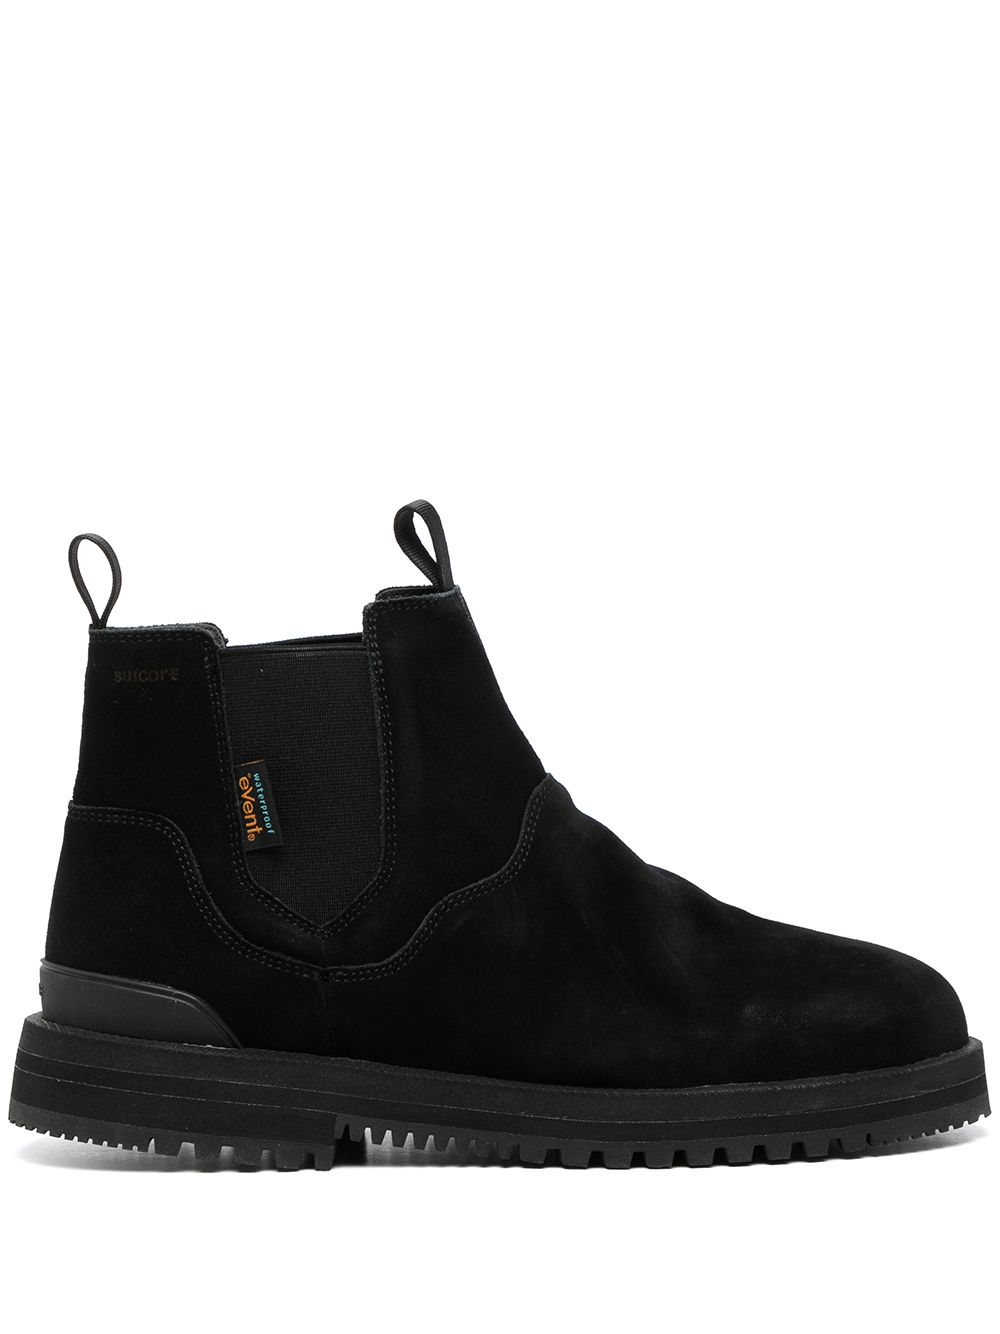 GORE-Sevab ankle boots